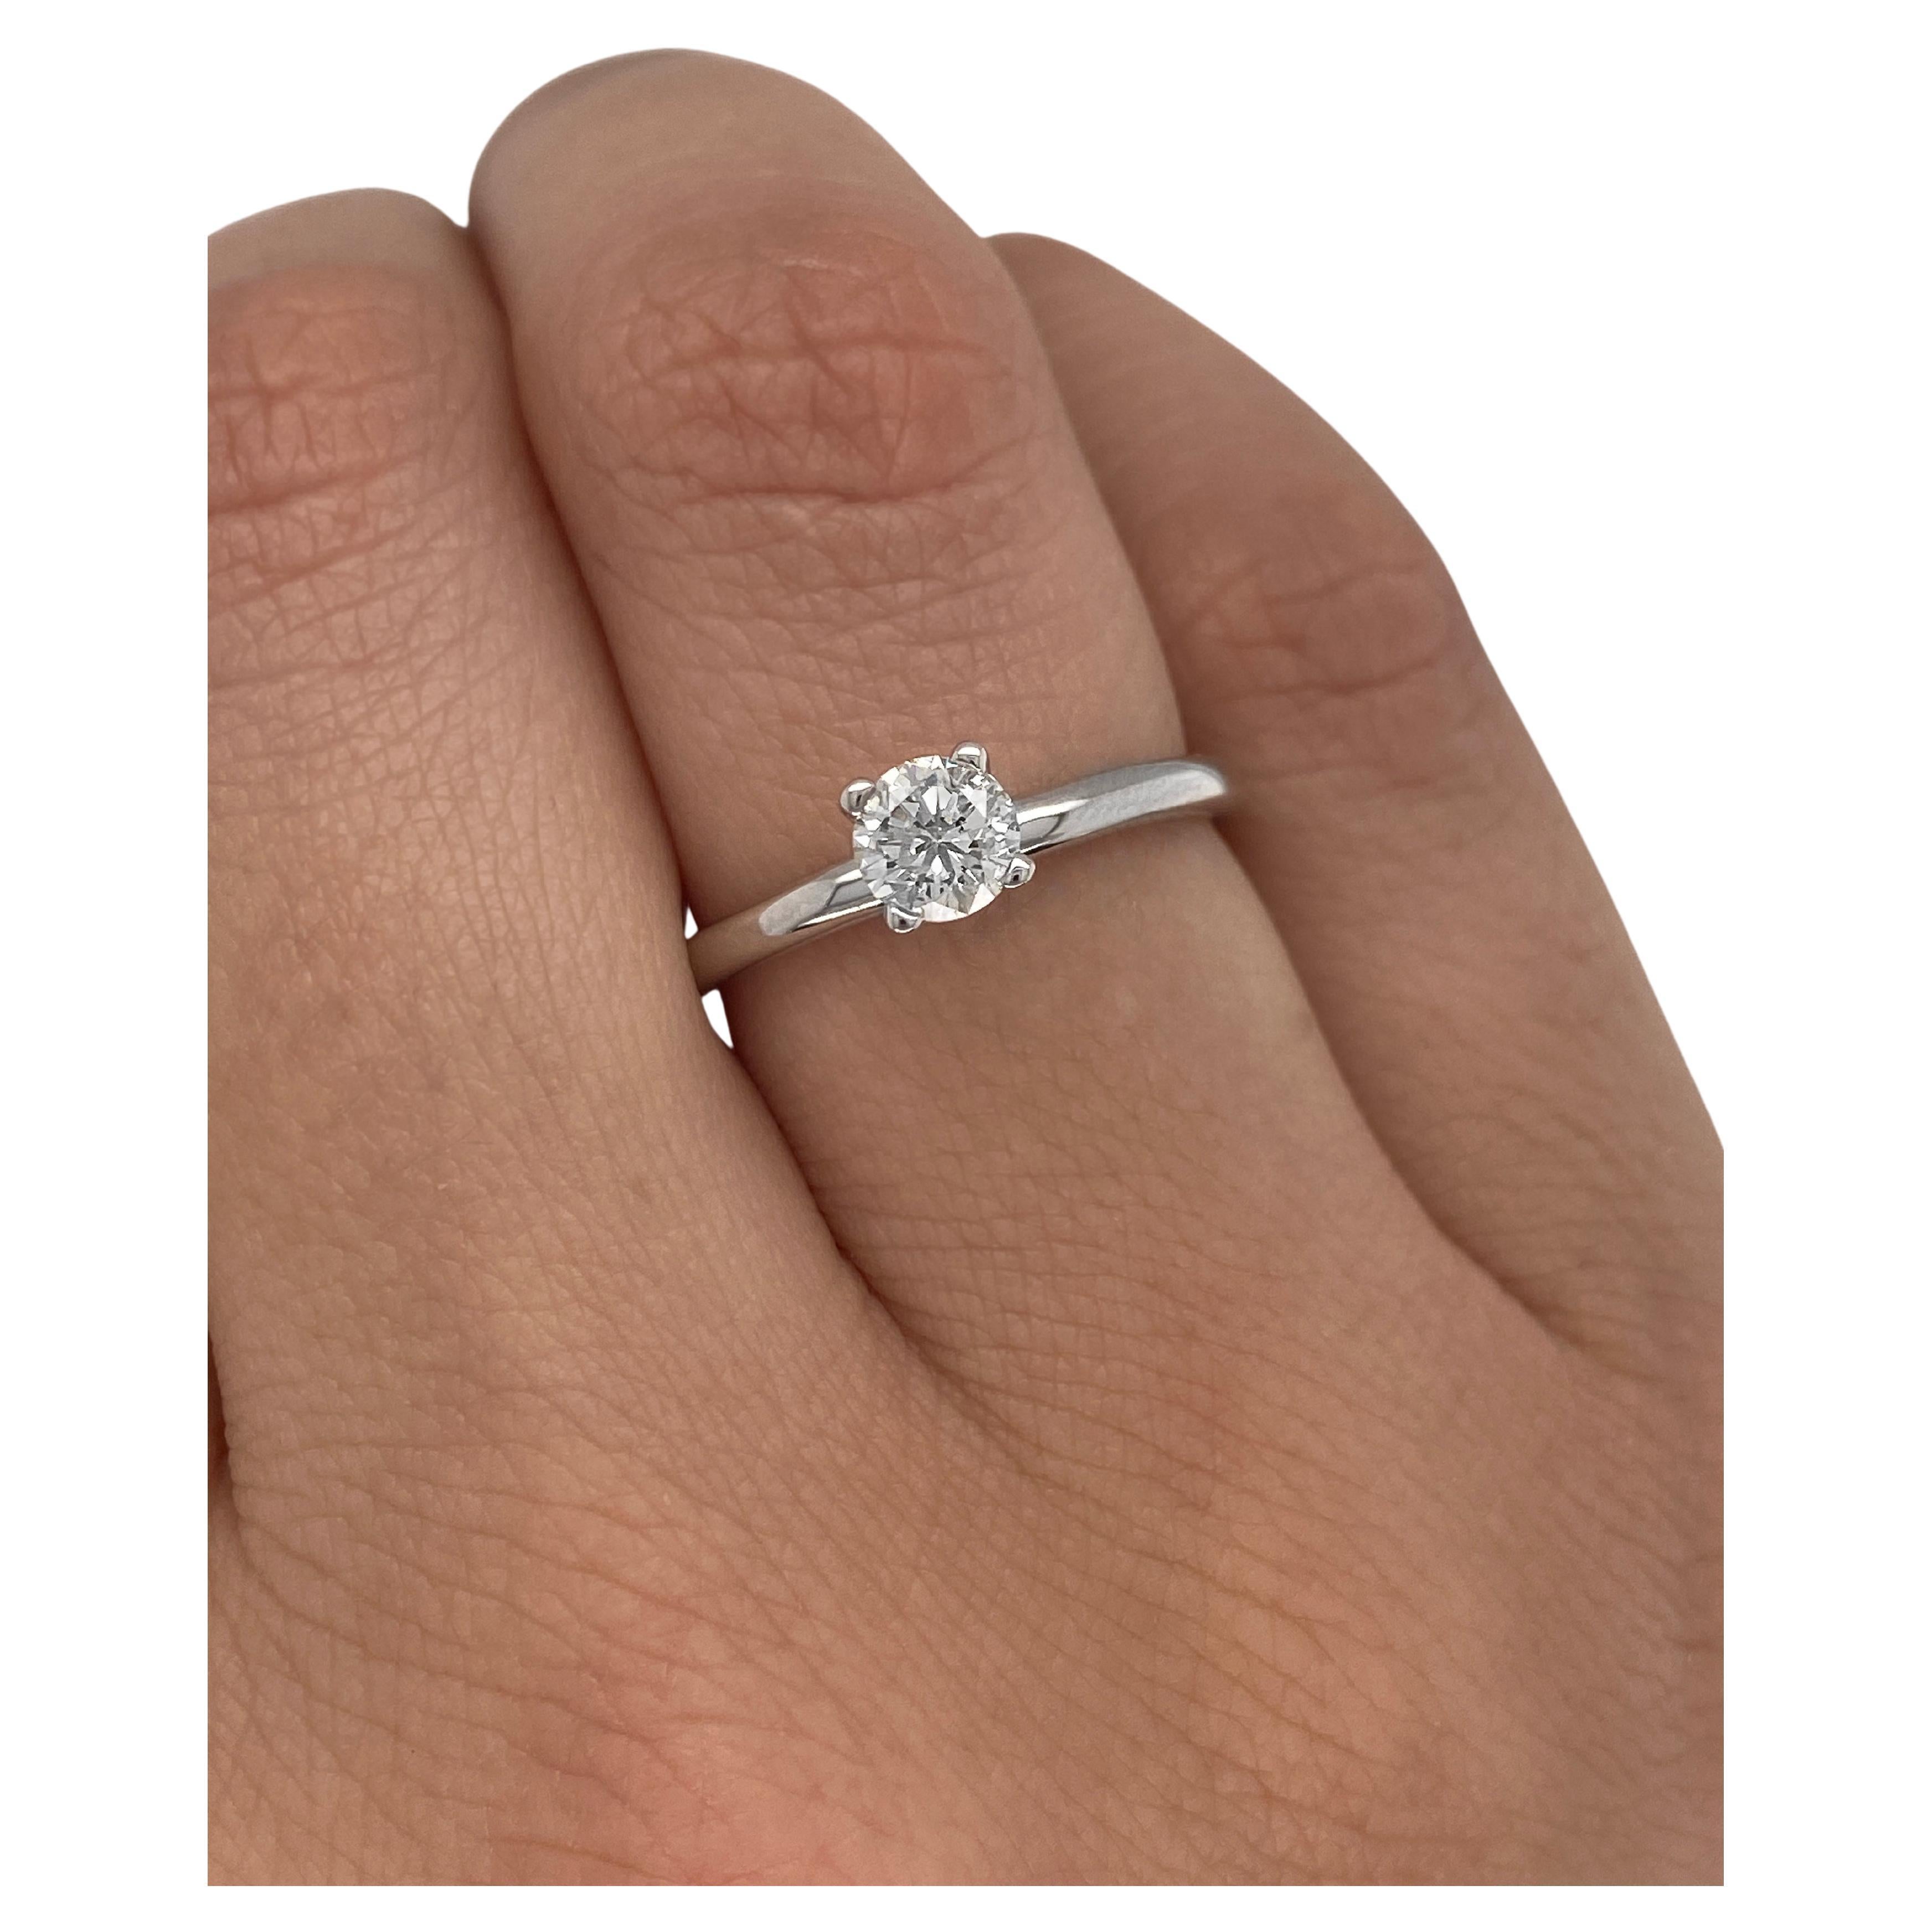 For Sale:  0.50 Ct Natural Round Cut Diamond Engagement Ring 14K White Gold